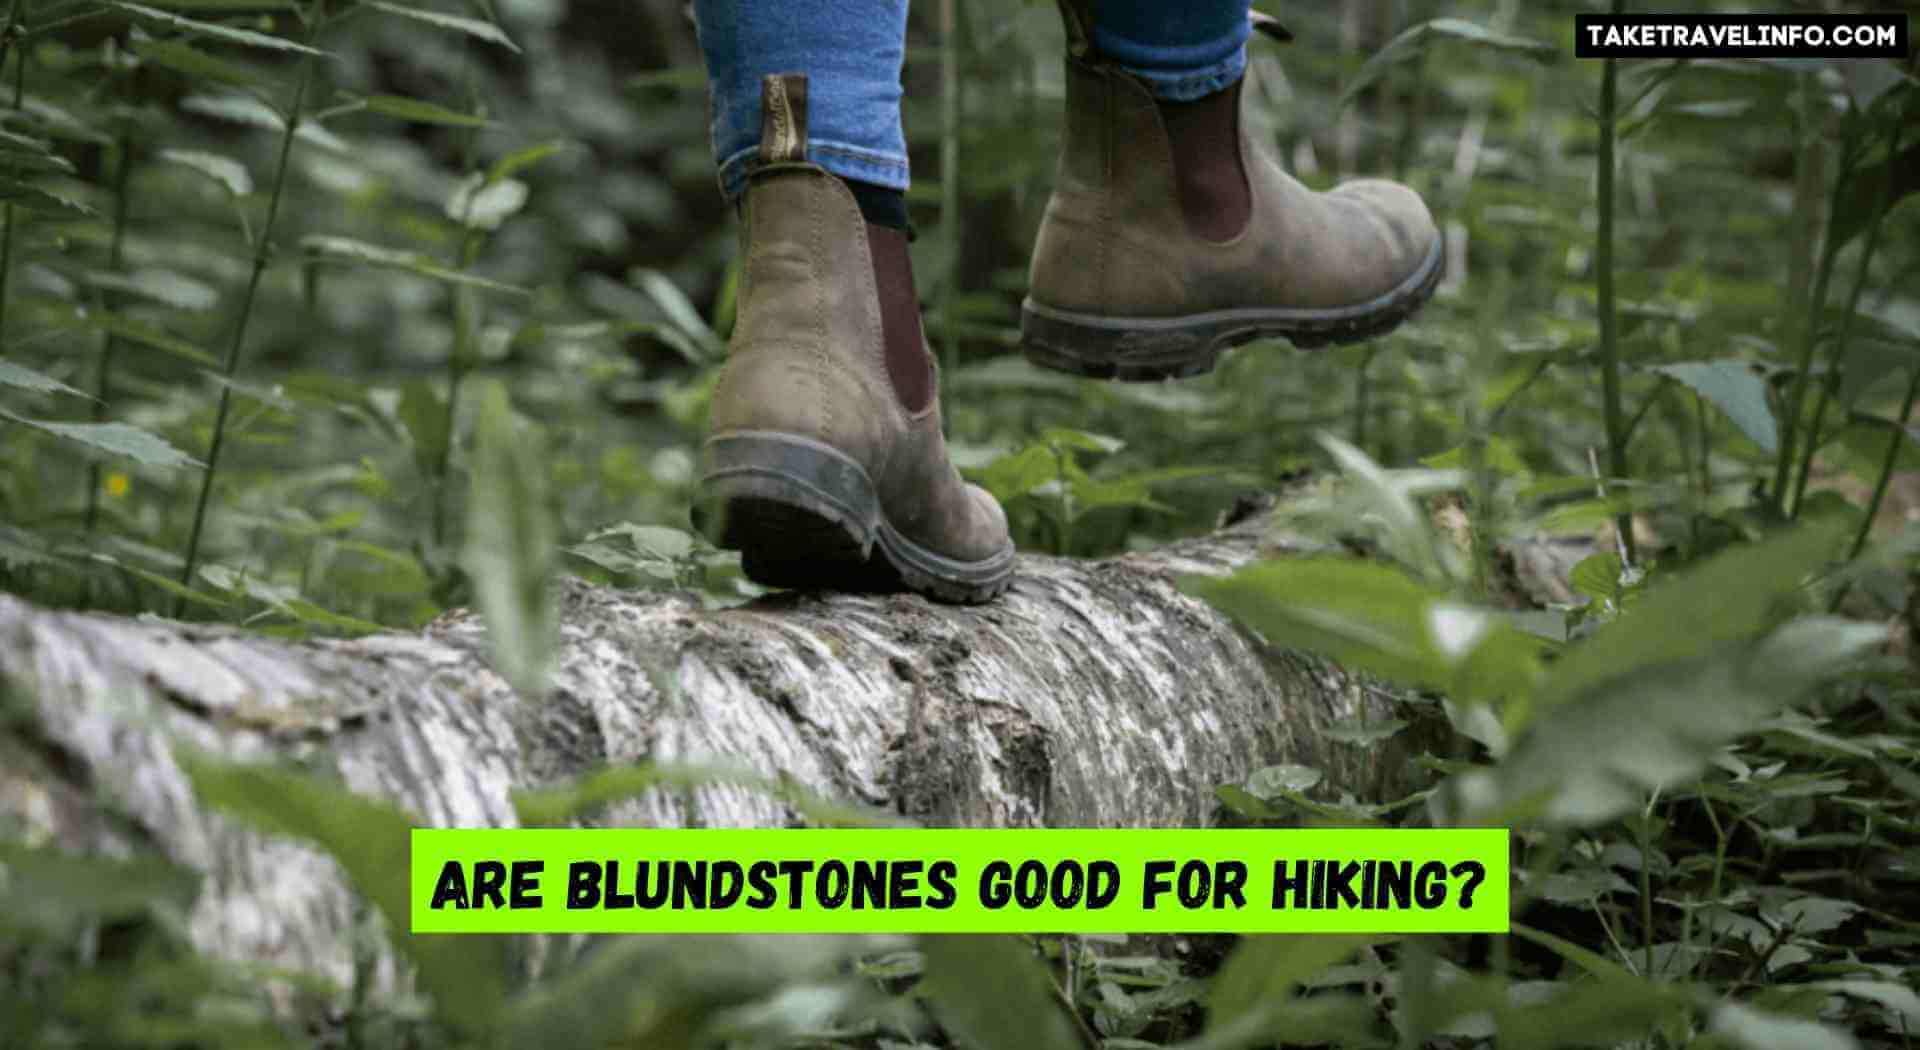 Are Blundstones Good for Hiking